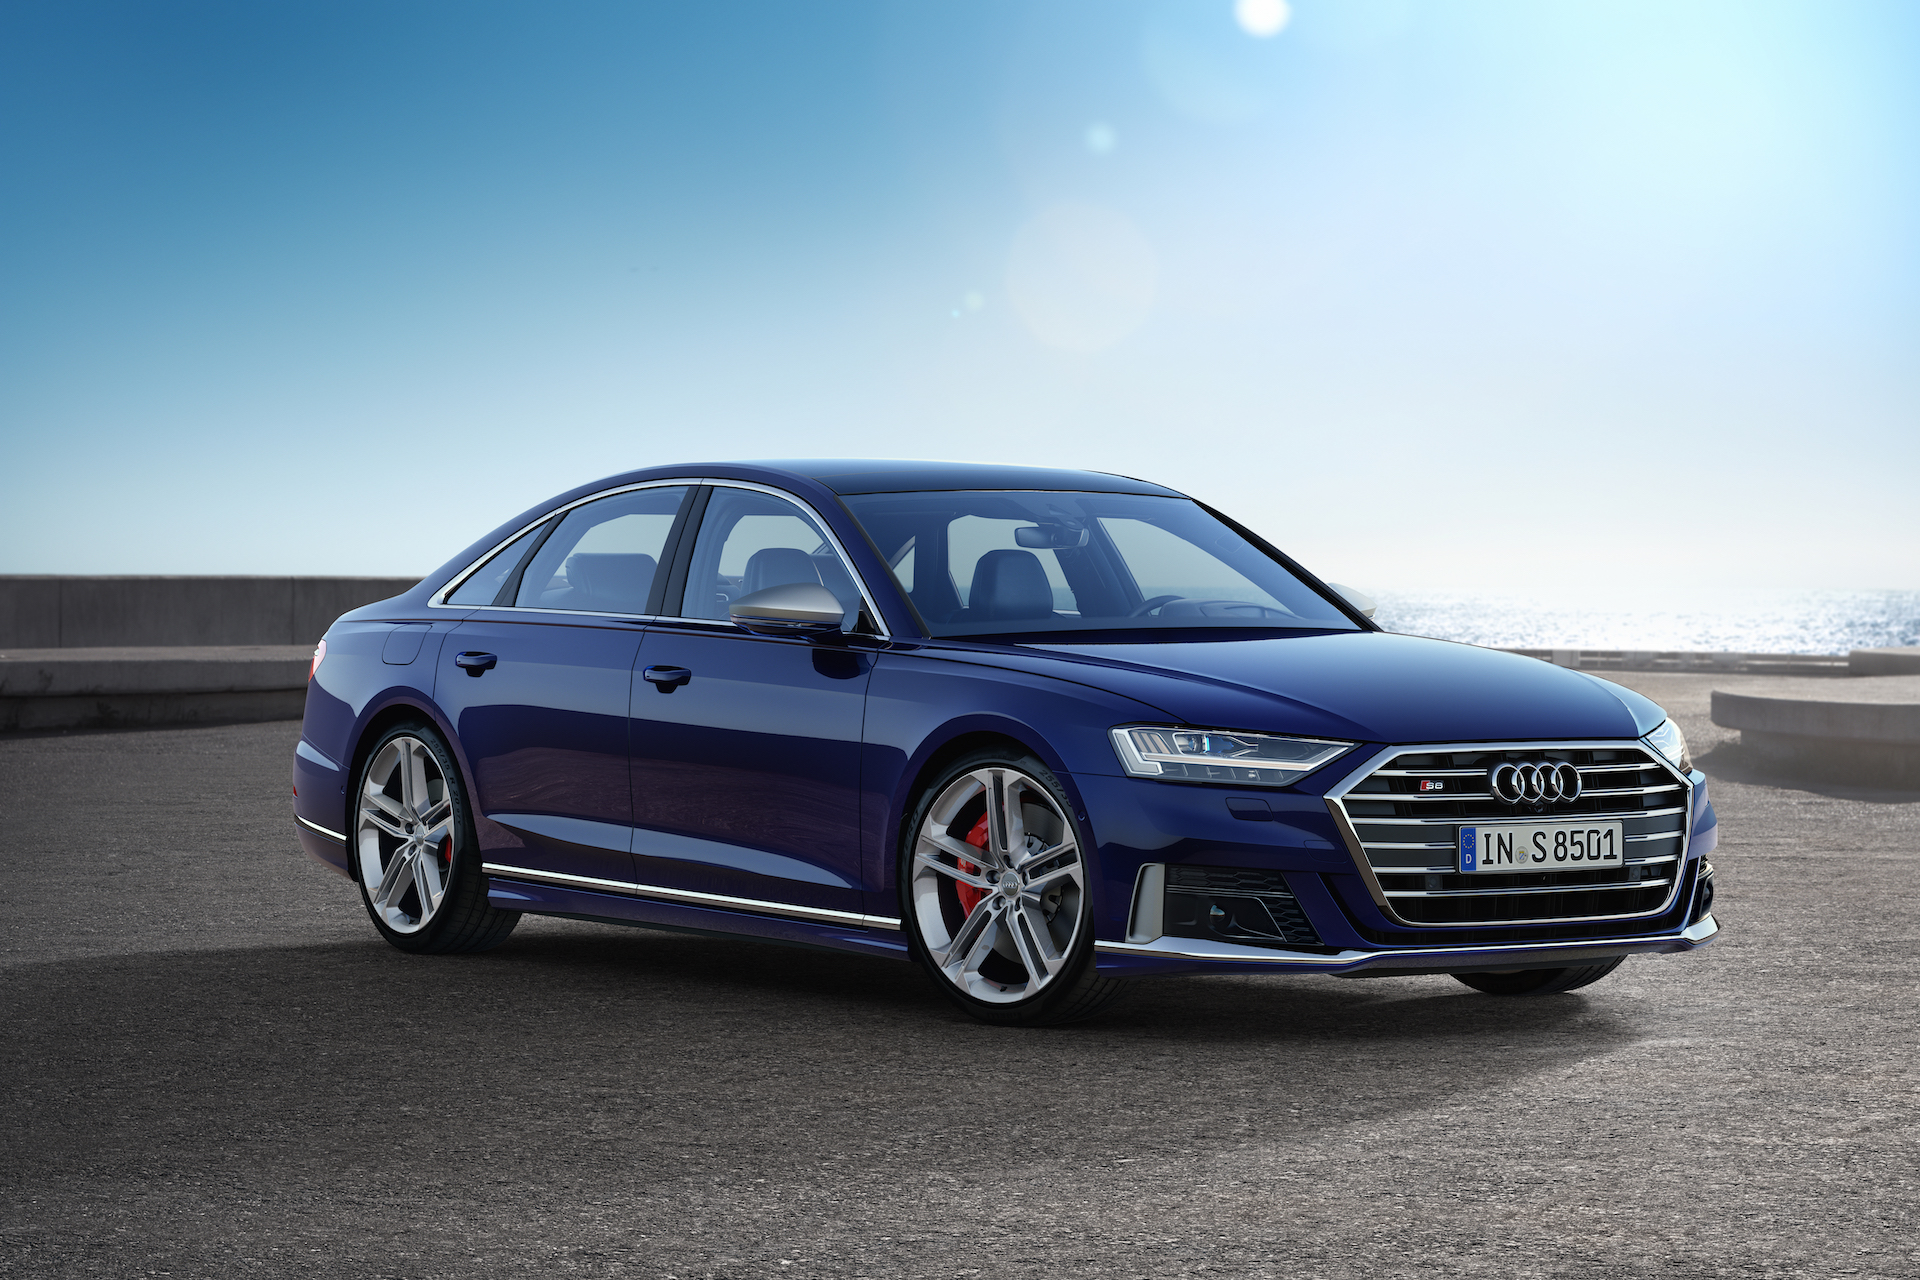 2020 Audi S8 revealed with 563 hp, the gamut of suspension technology